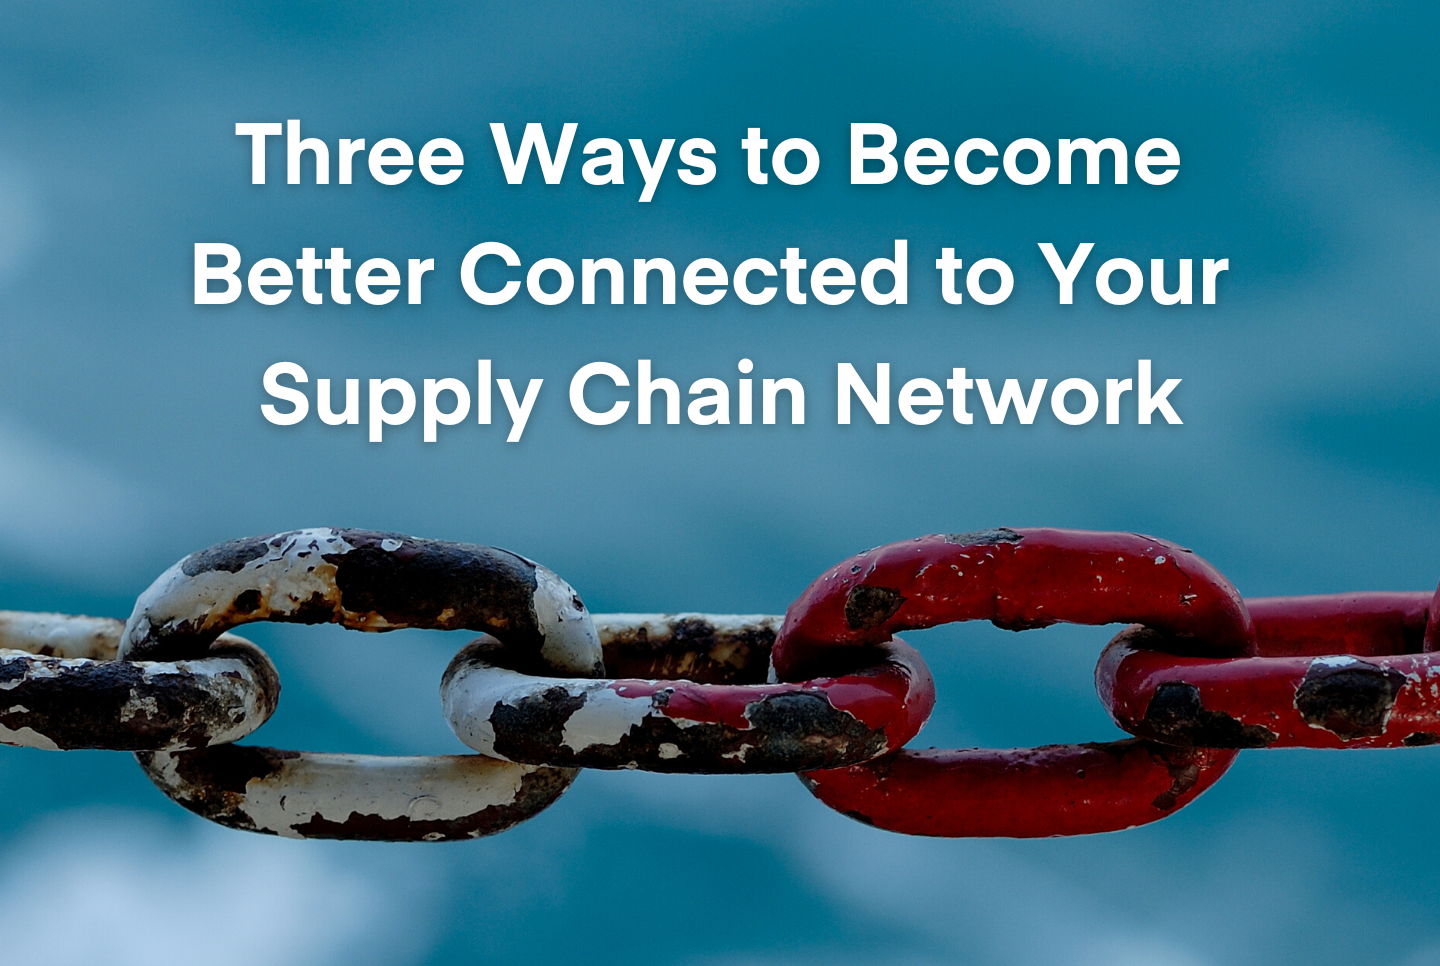 Become better connected to your supply chain network with Chain.io